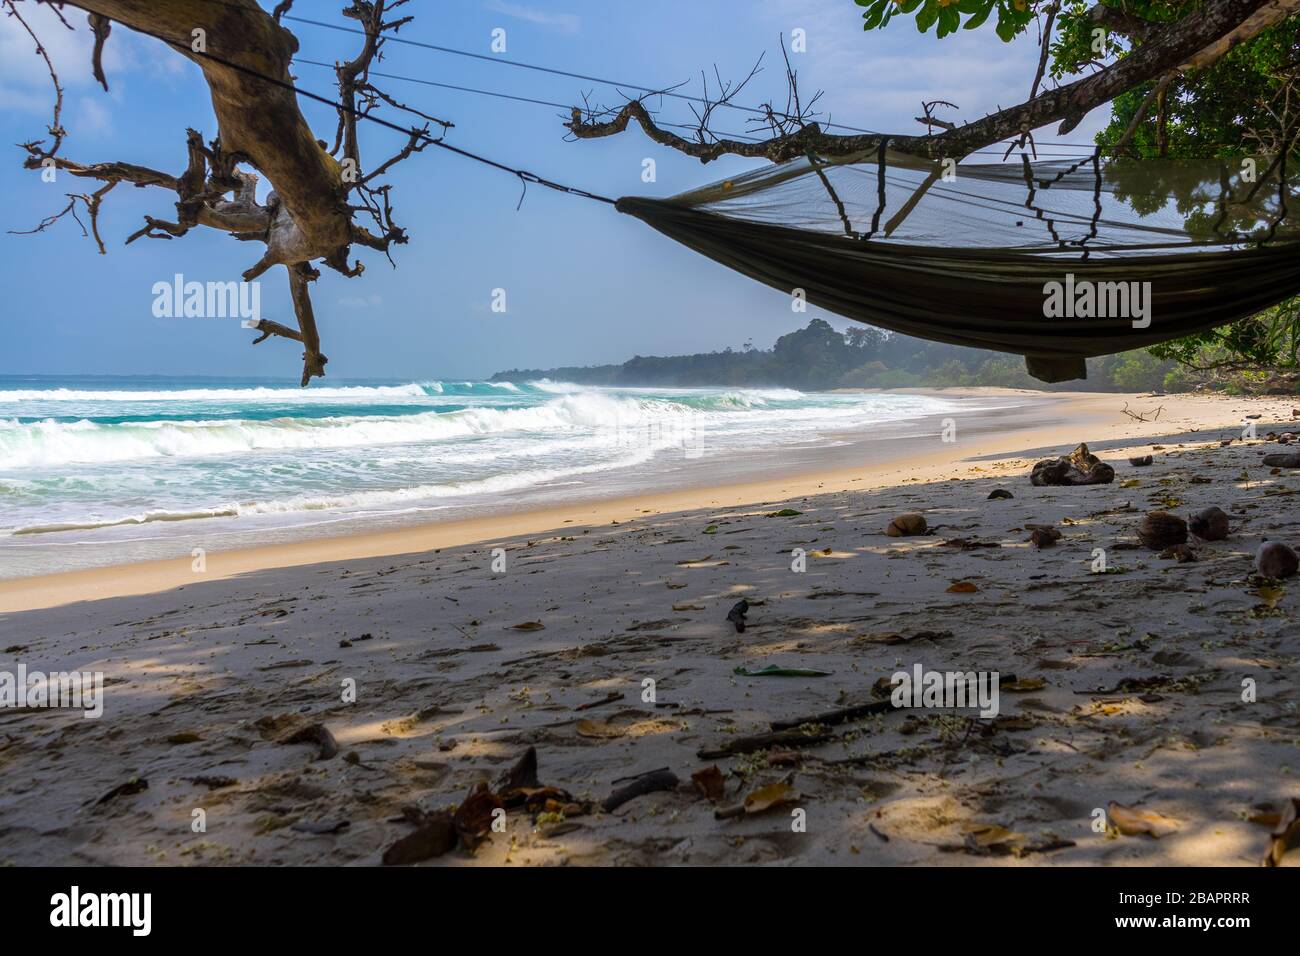 Wild camping with a hammock at undiscoverd beach amazing location in Bengkulu province, Sumatra, Indonesia Stock Photo